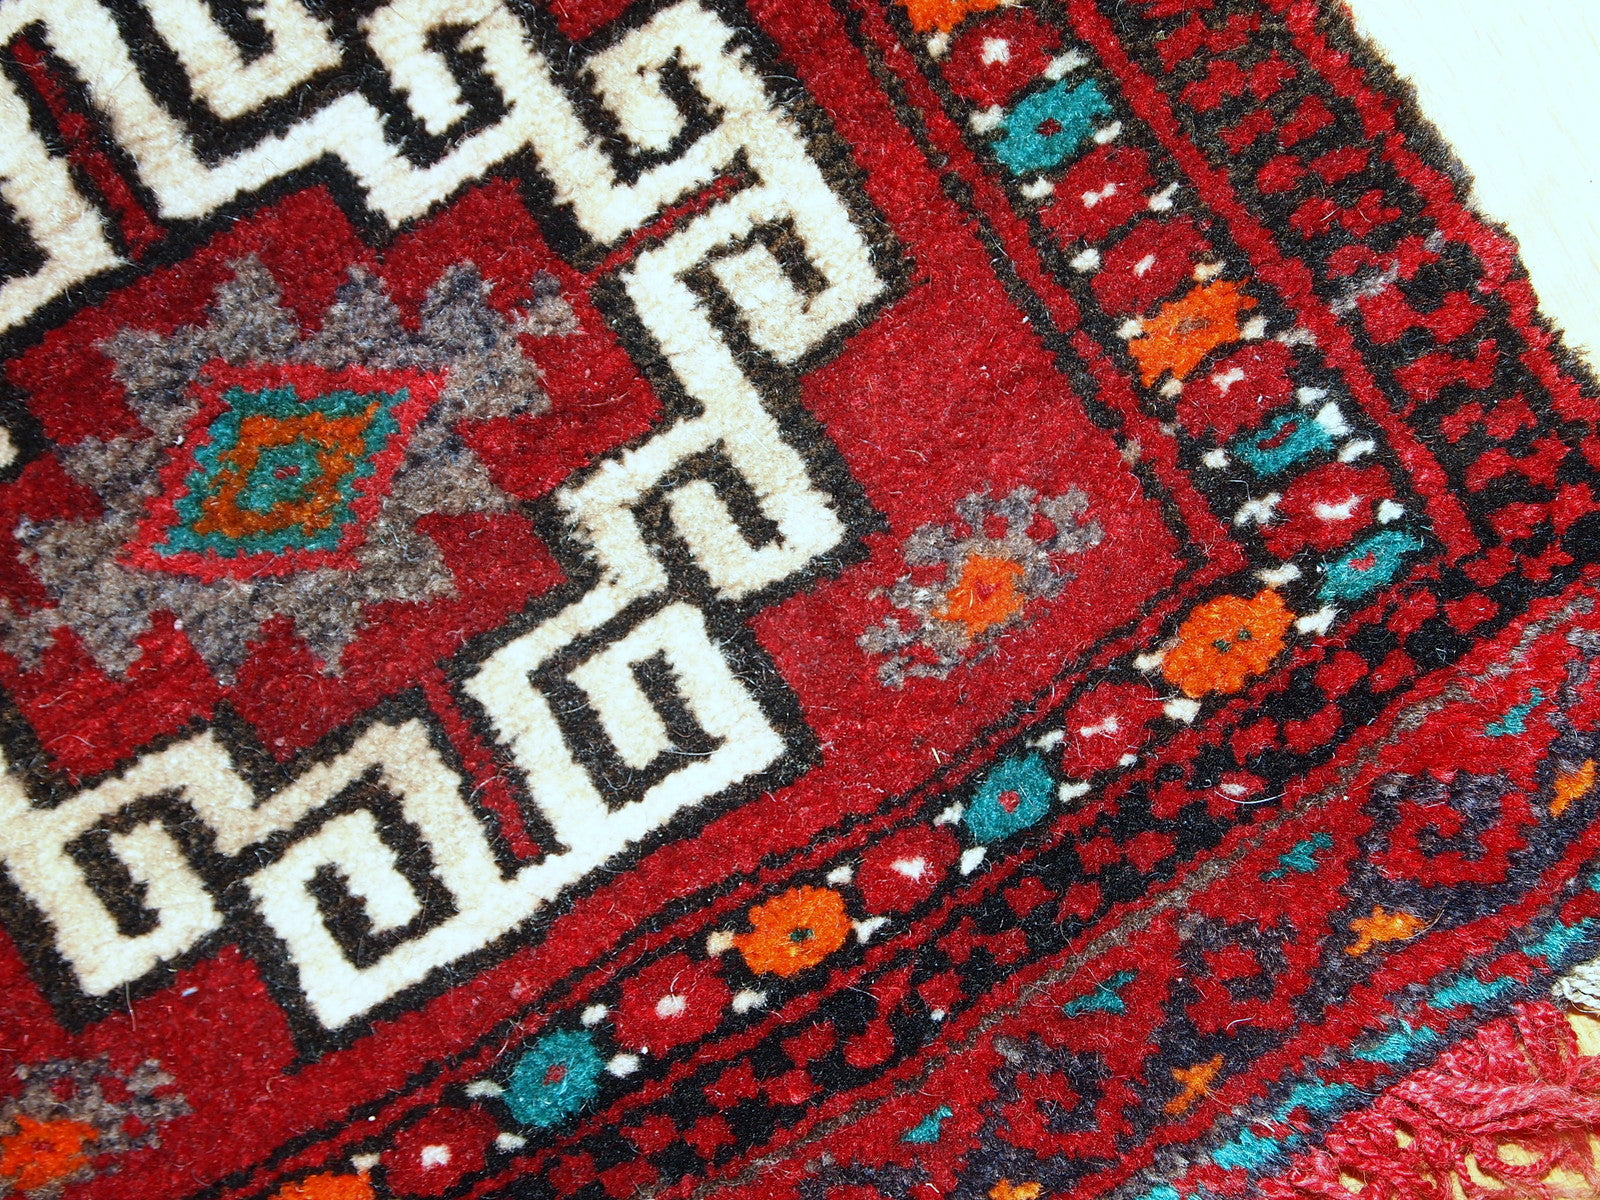 Hand crafted Turkish Anatolian bag in original good condition. The bag is from 1970s in red, orange and turquoise shades.